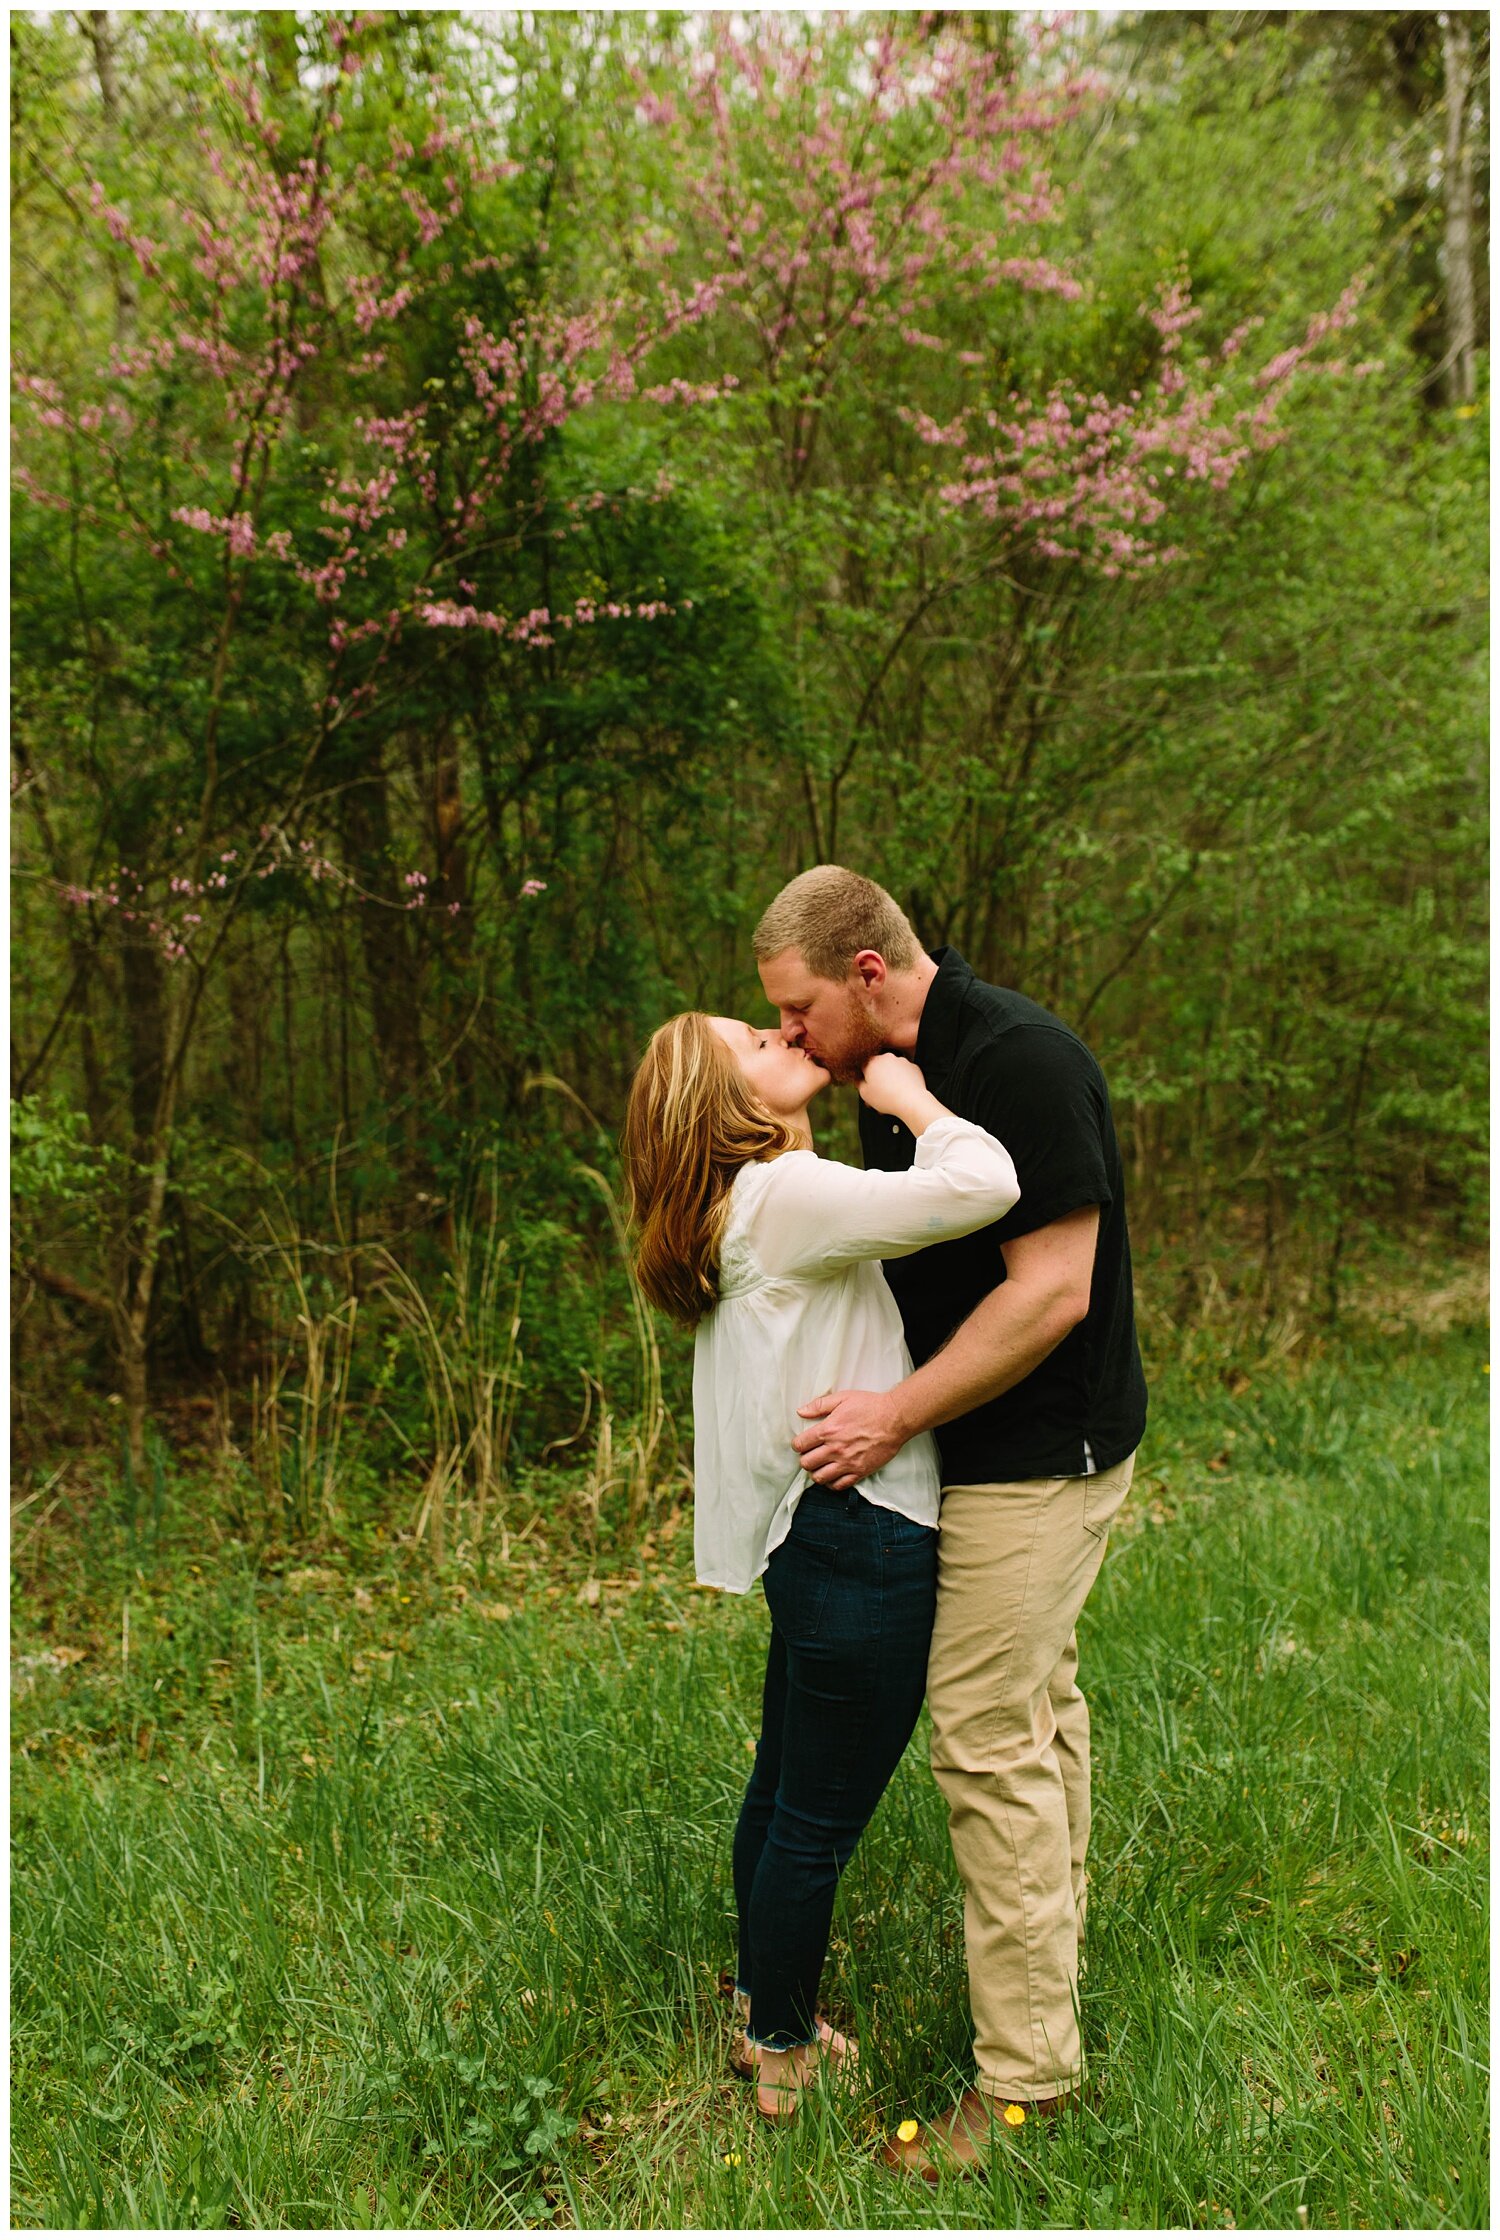 Kendra_Farris_Photography_Red_River_Gorge_Engagement_Photos-20.jpg